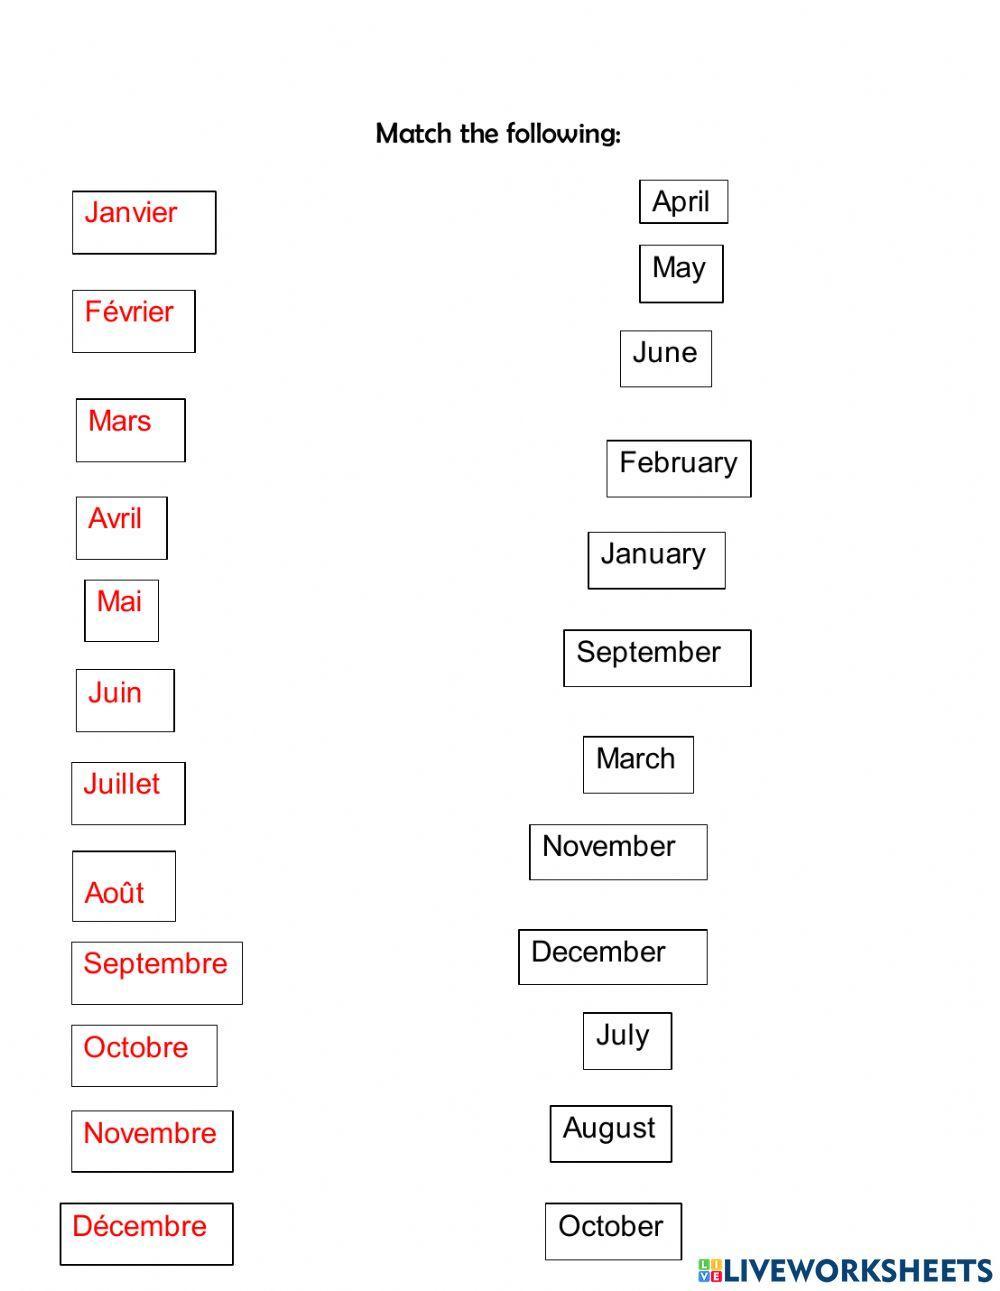 Months of the year in French